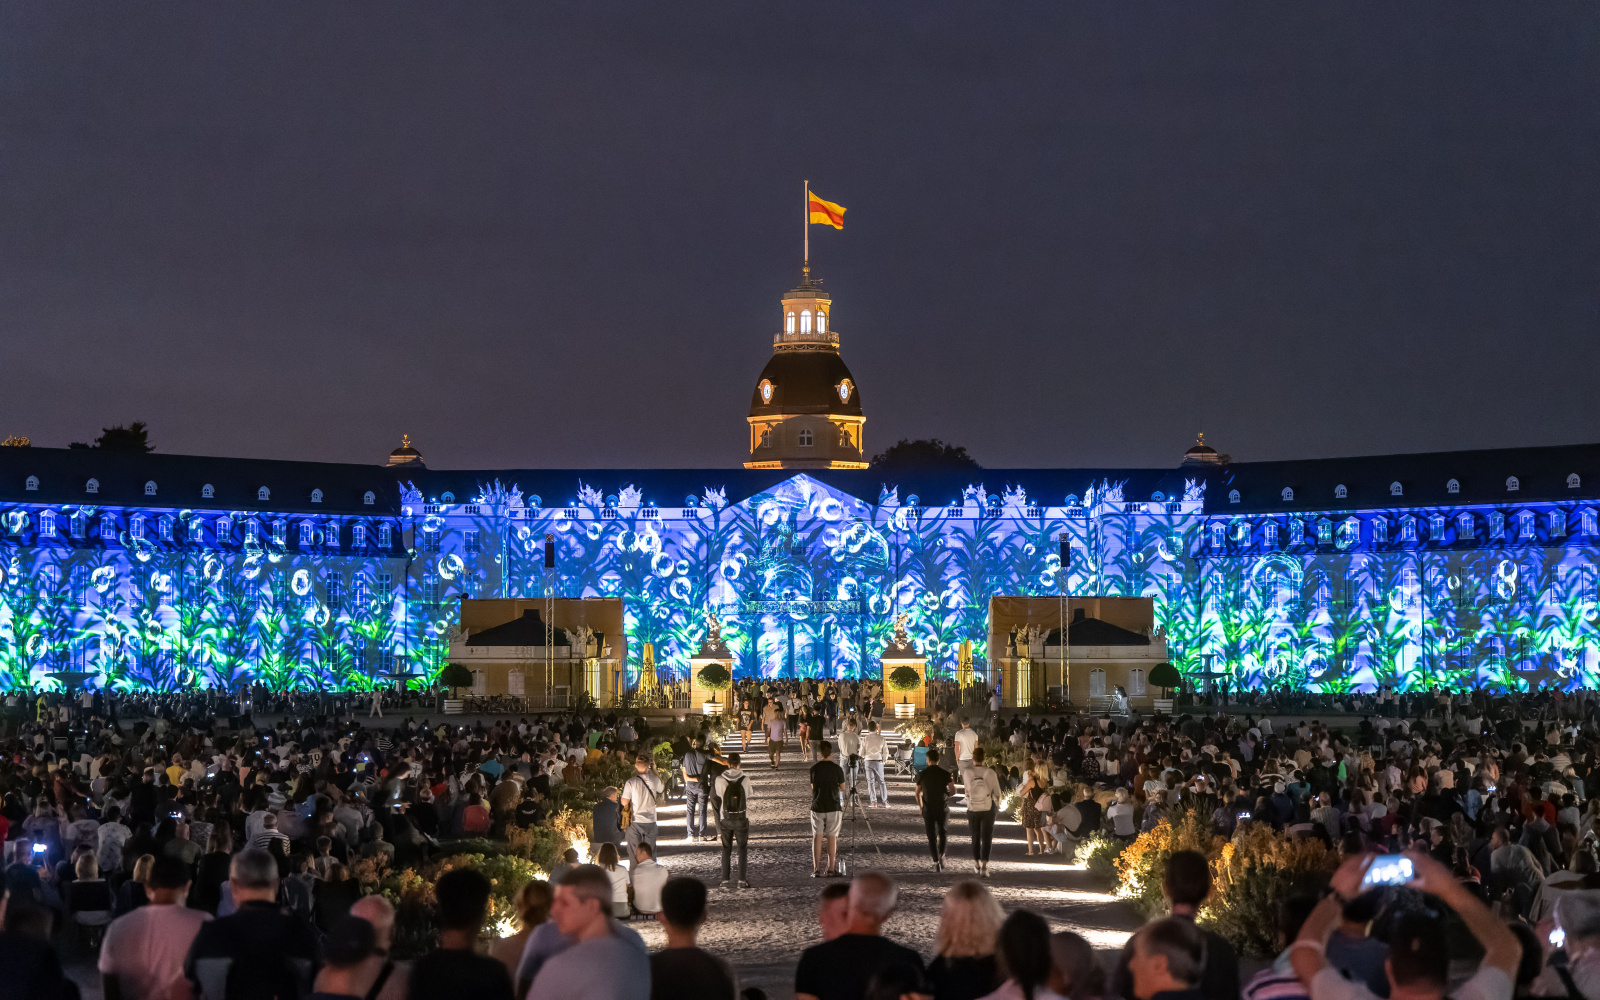 Karlsruhe Castle illuminates in a blue-green plant pattern. You can also see the many people sitting in the audience.